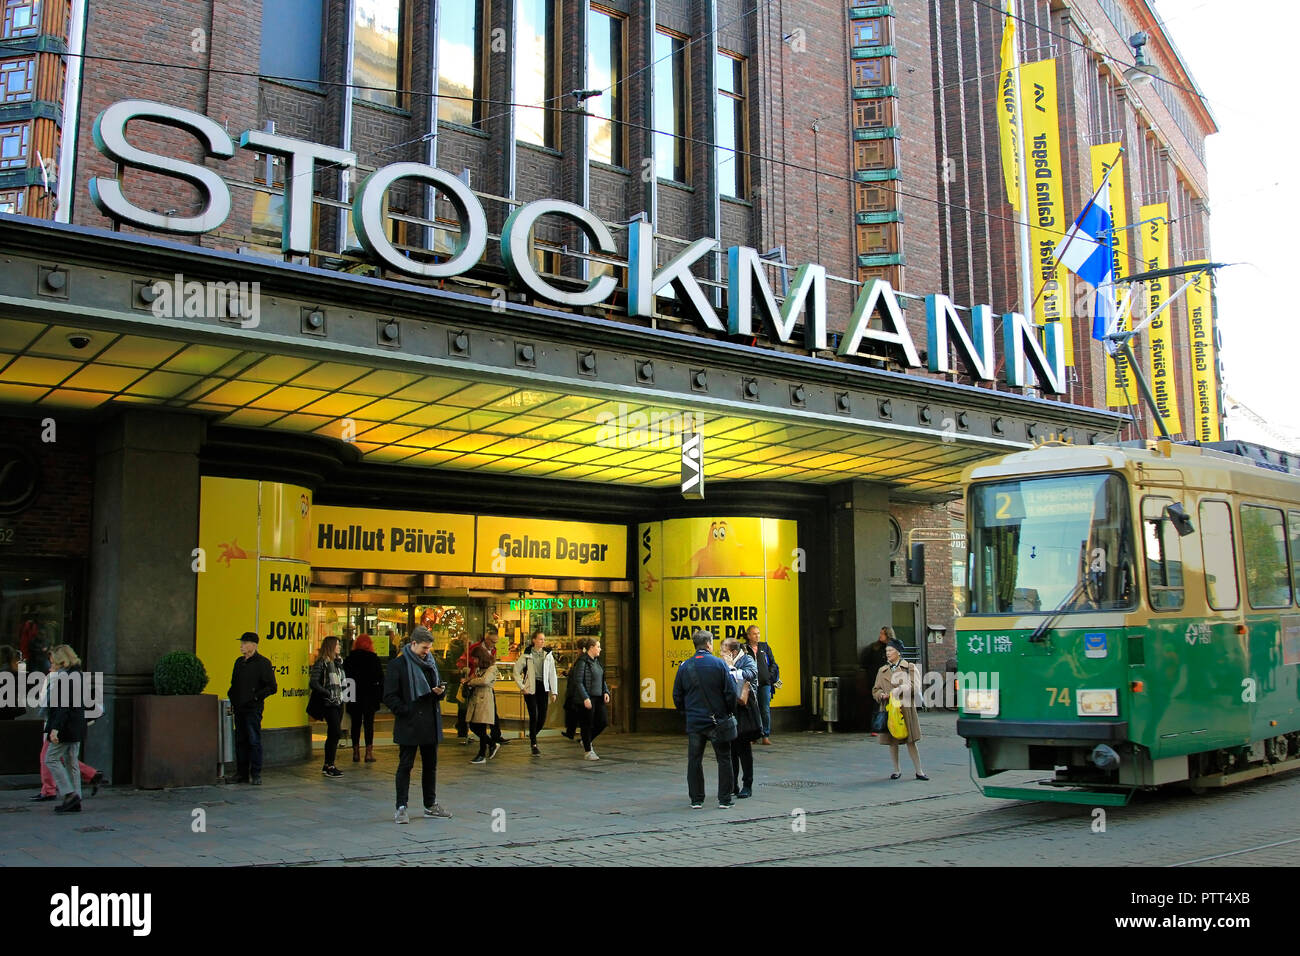 Helsinki, Finland - October 10, 2018: Crazy Days, the biannual, massive and popular 5-day sale event at Stockmann department store begins. In photo the yellow entrance of Stockmann's flagship store in Helsinki. Credit: Taina Sohlman/Alamy Live News Stock Photo